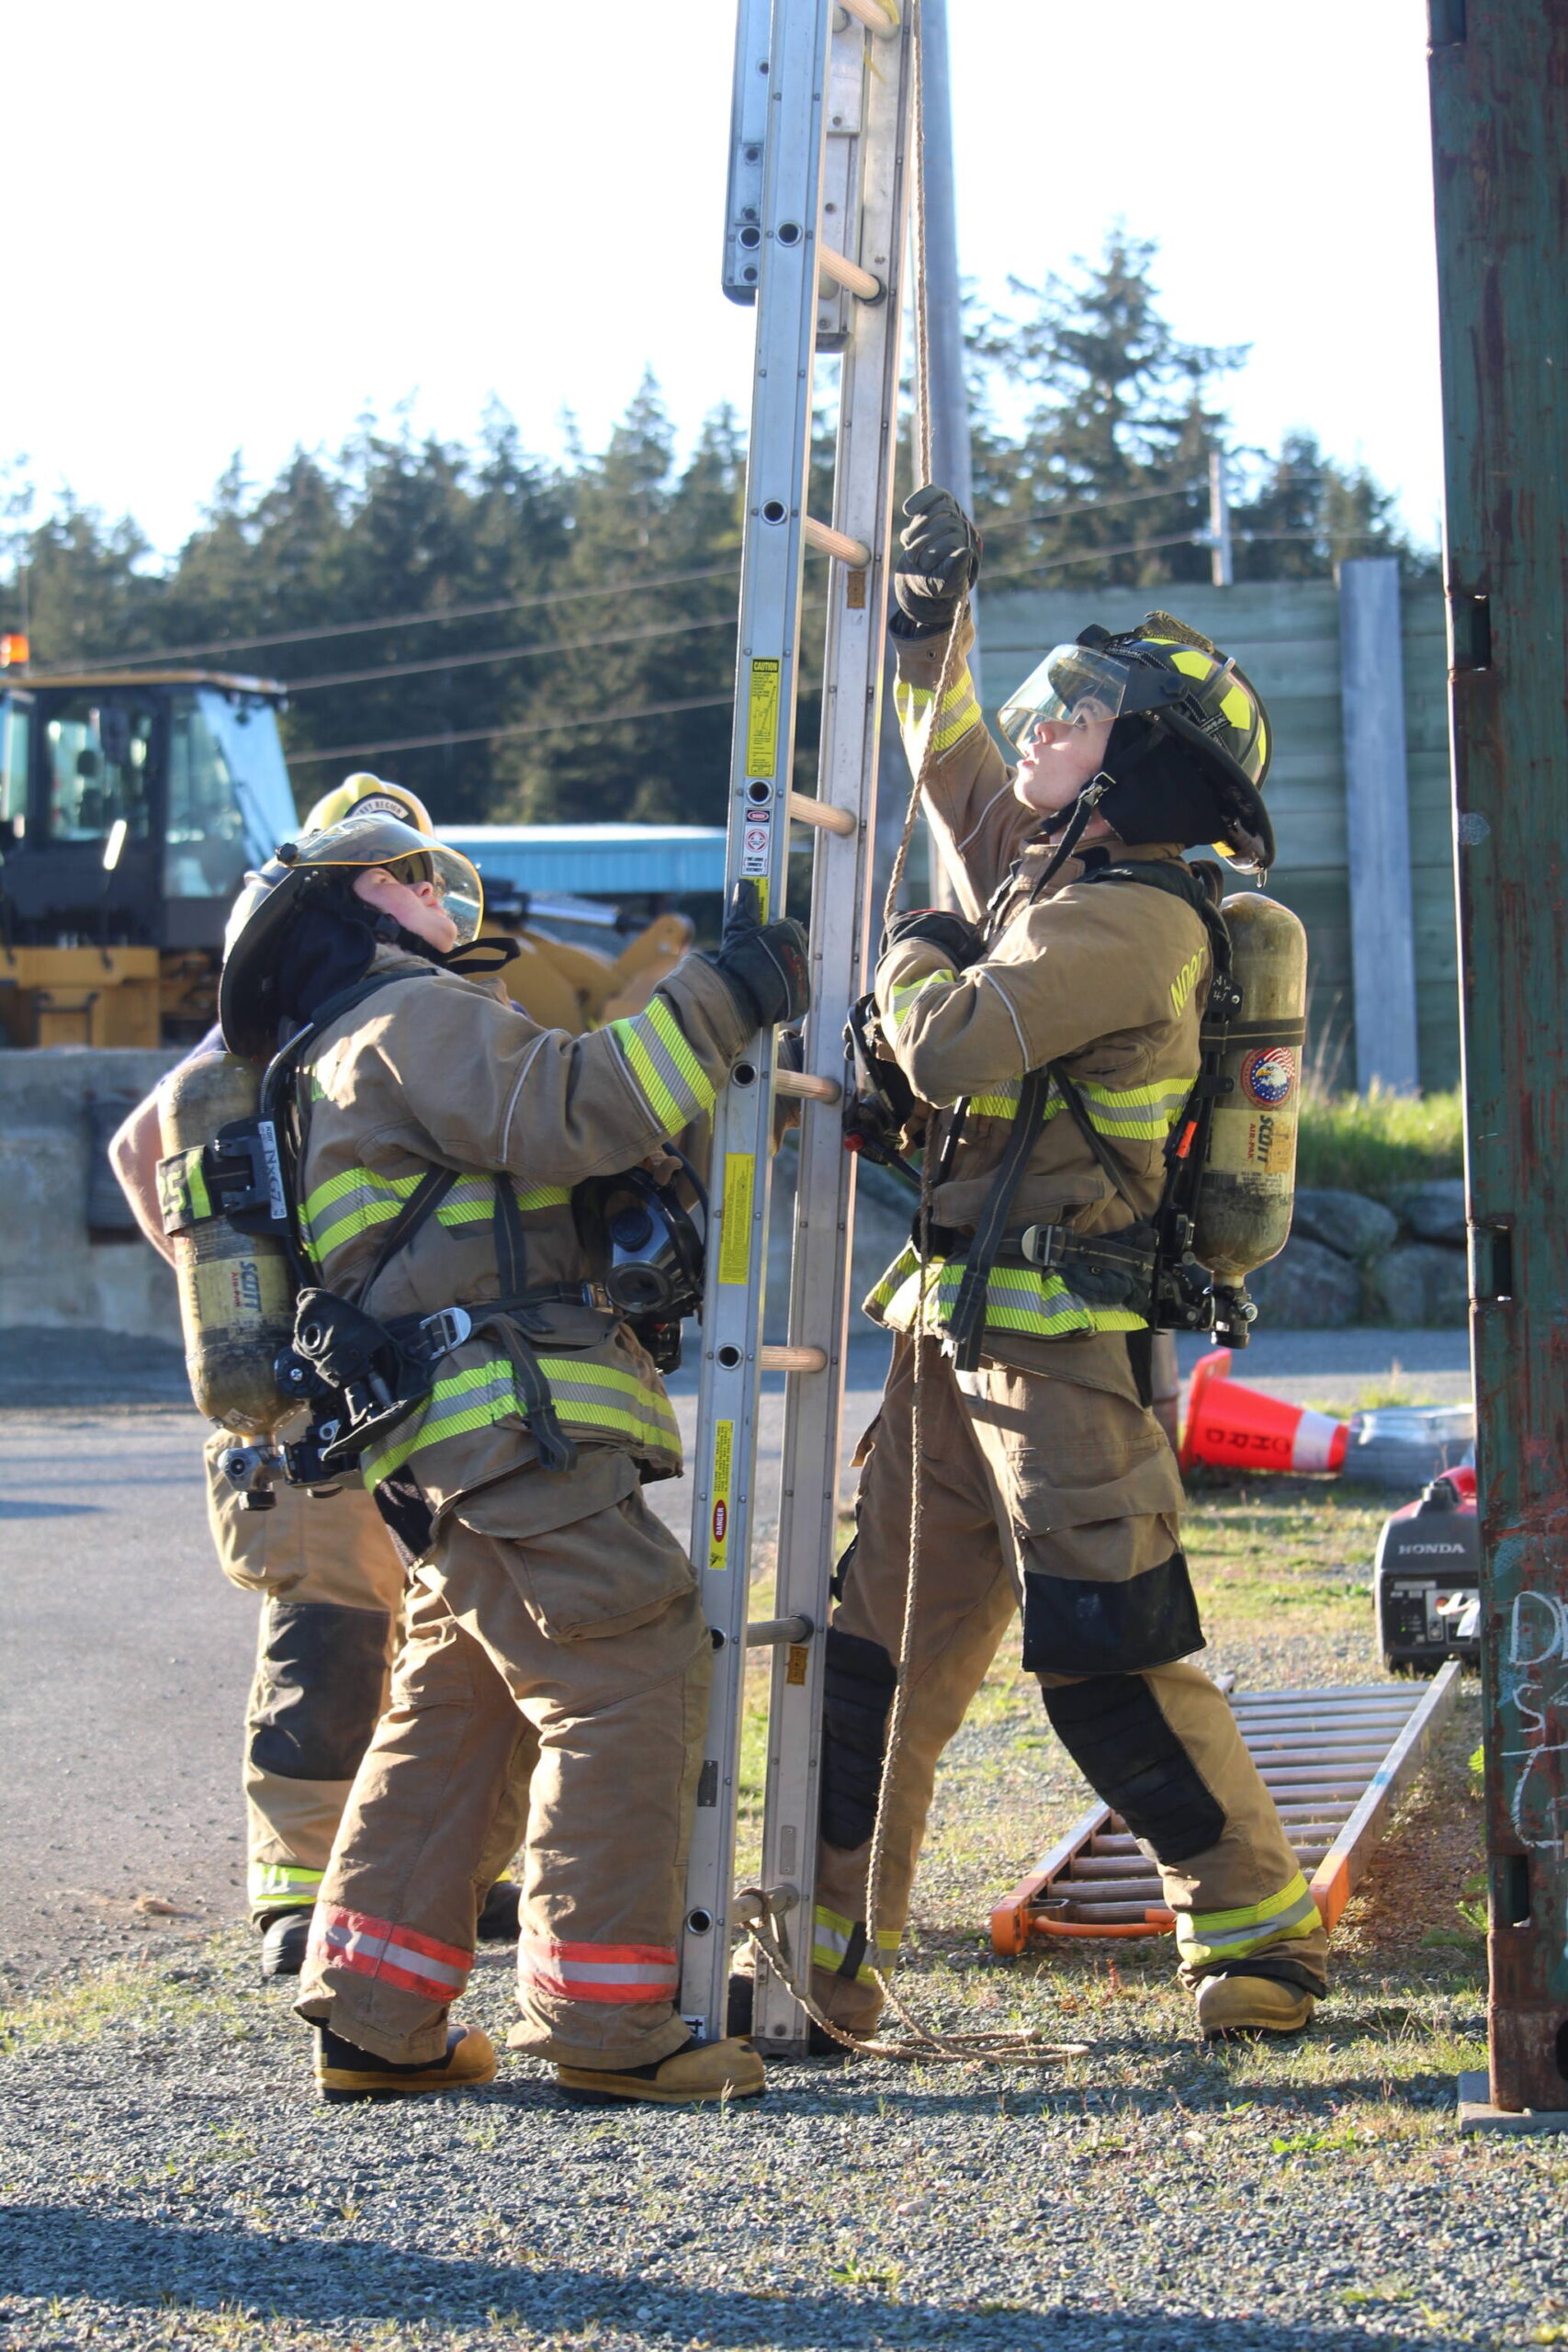 Kadin Gazy-Delap and Aysa Pressley train in Oak Harbor April 12. (Photo by Karina Andrew/Whidbey News-Times)